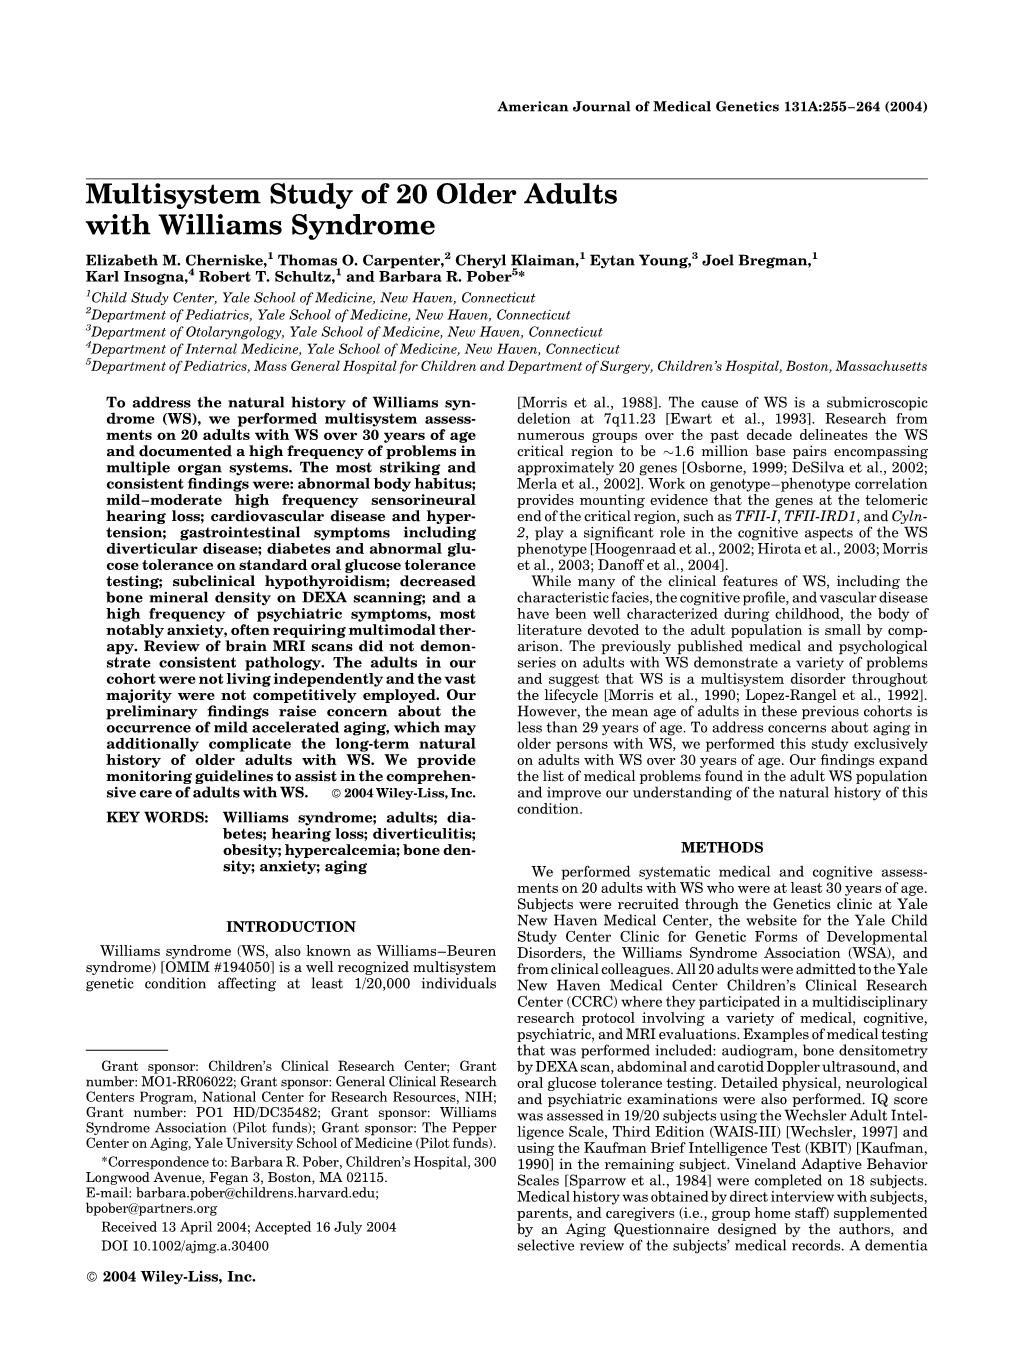 Multisystem Study of 20 Older Adults with Williams Syndrome Elizabeth M